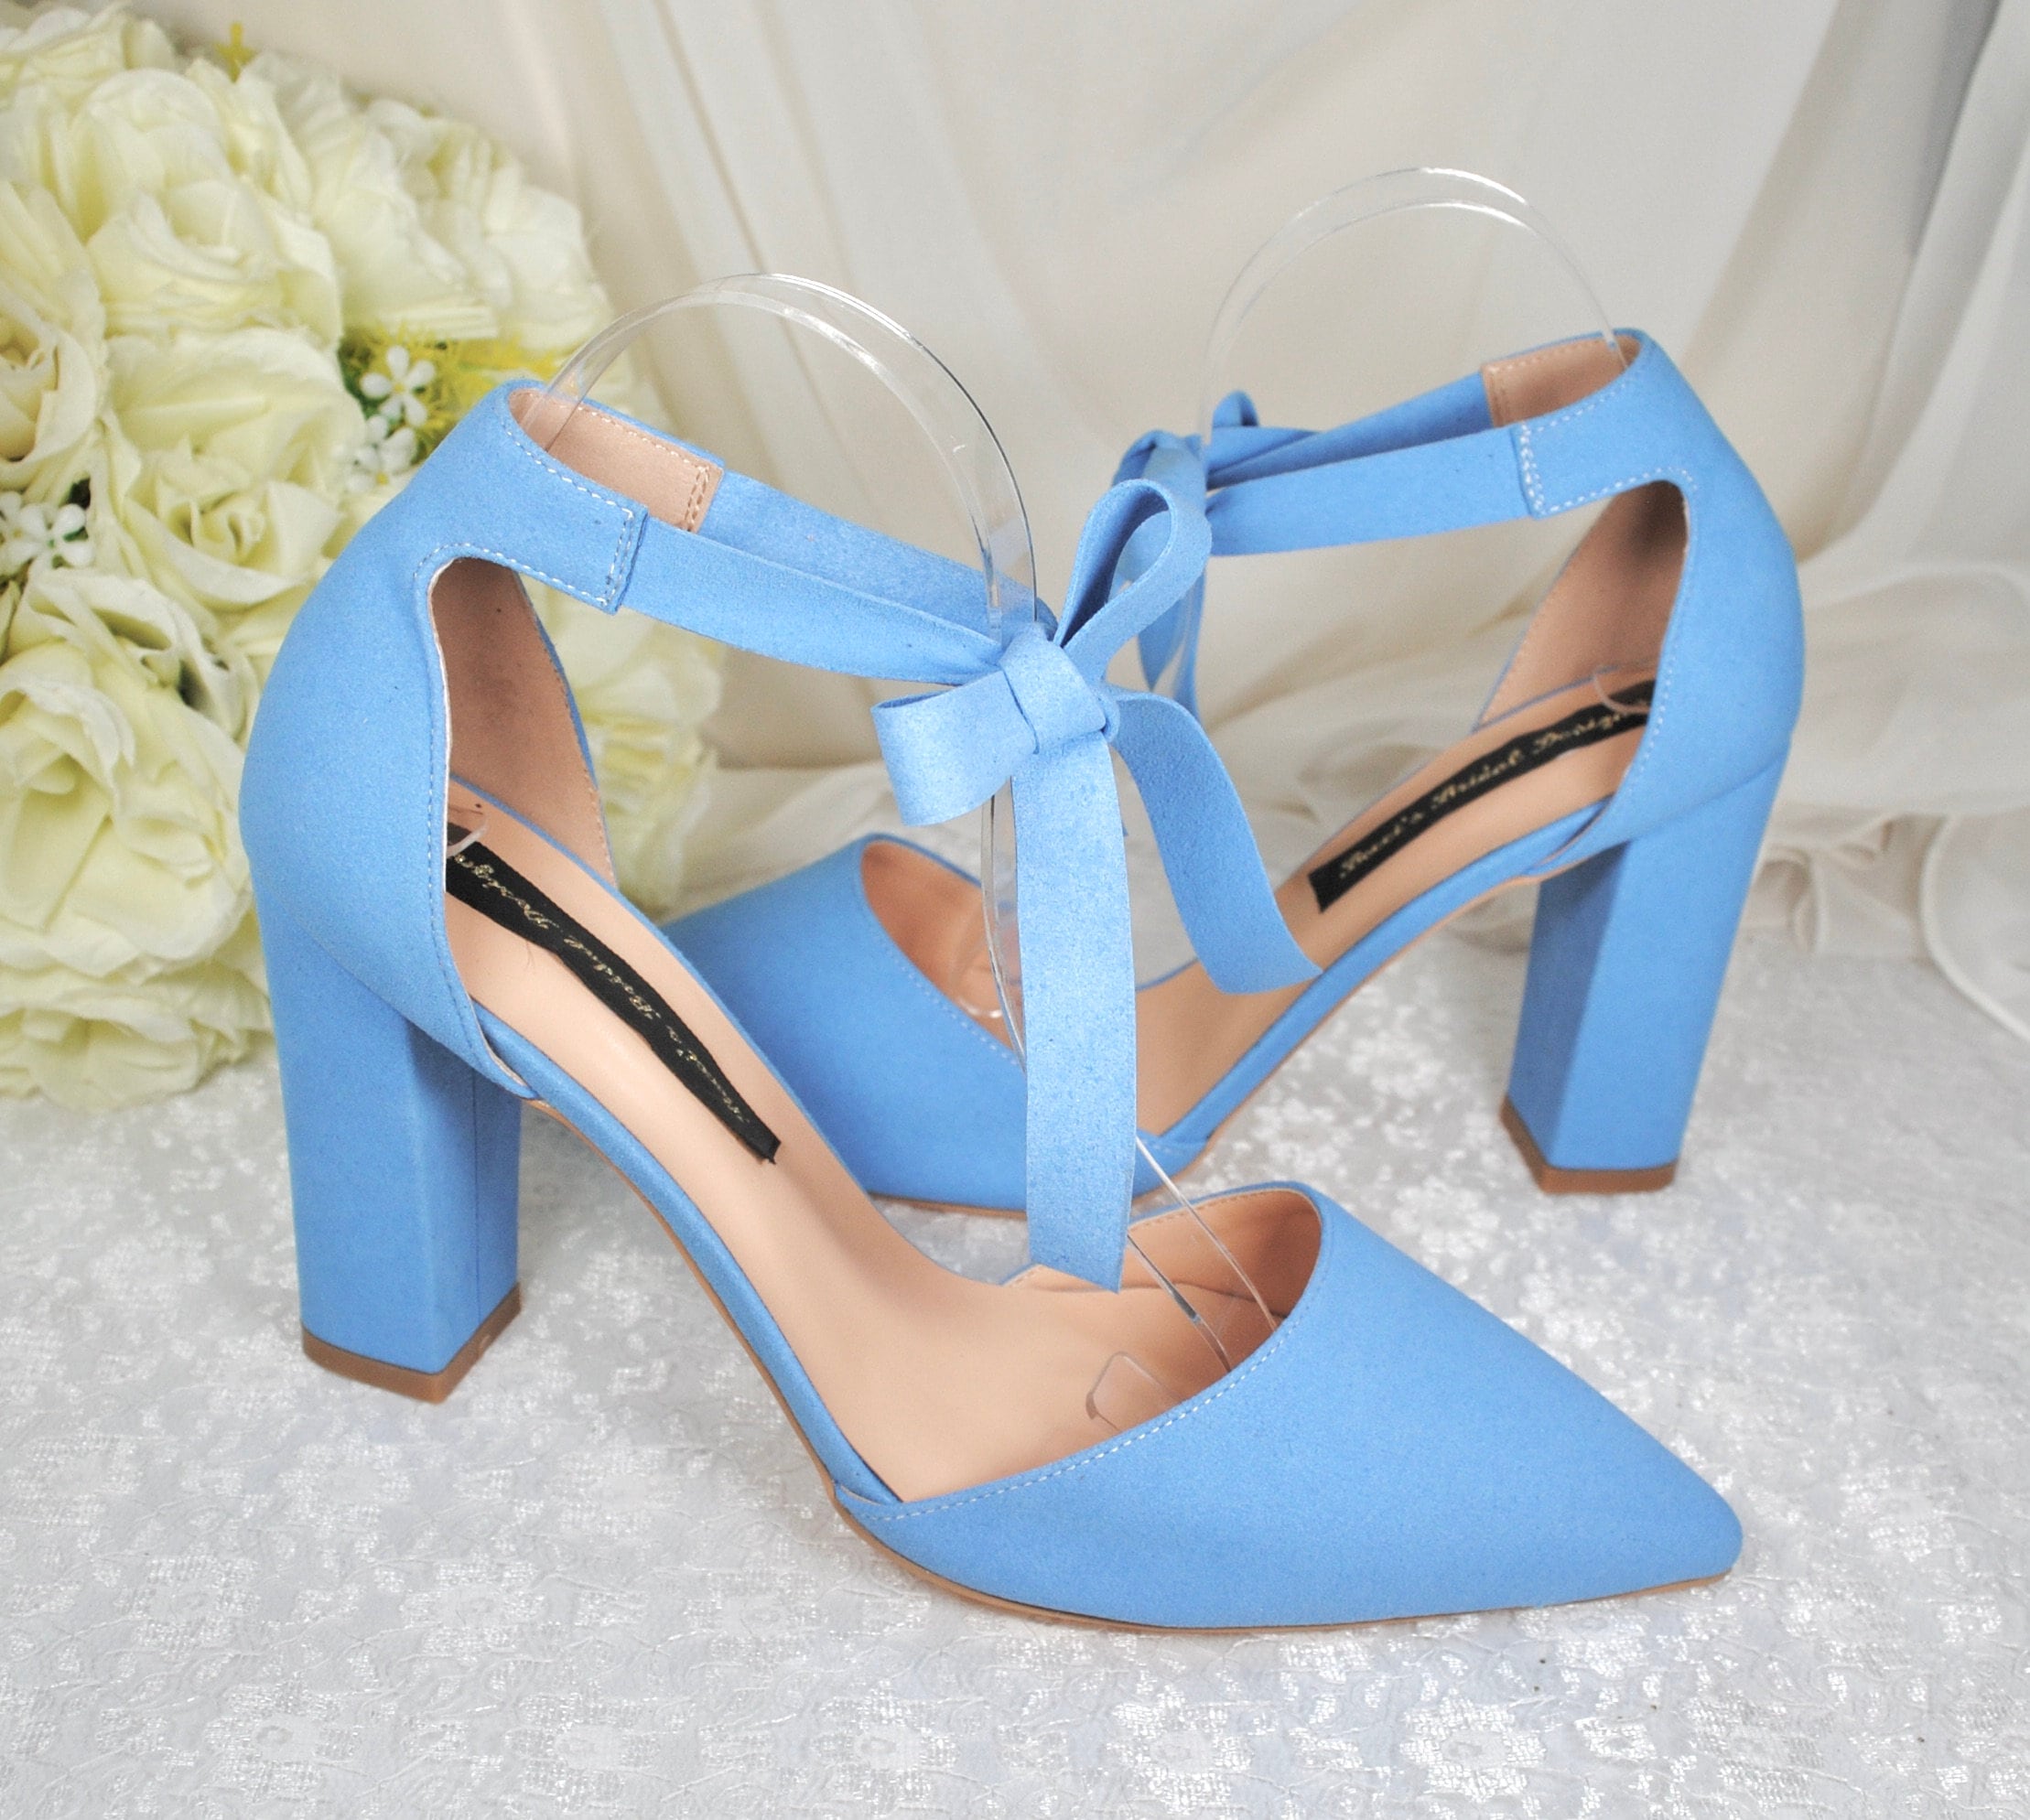 French Wedding Shoes Women New Wedding Bridal Shoes Golden High Heels Bow  Stiletto Bridesmaid Crystal Shoes Fashion All-match - AliExpress